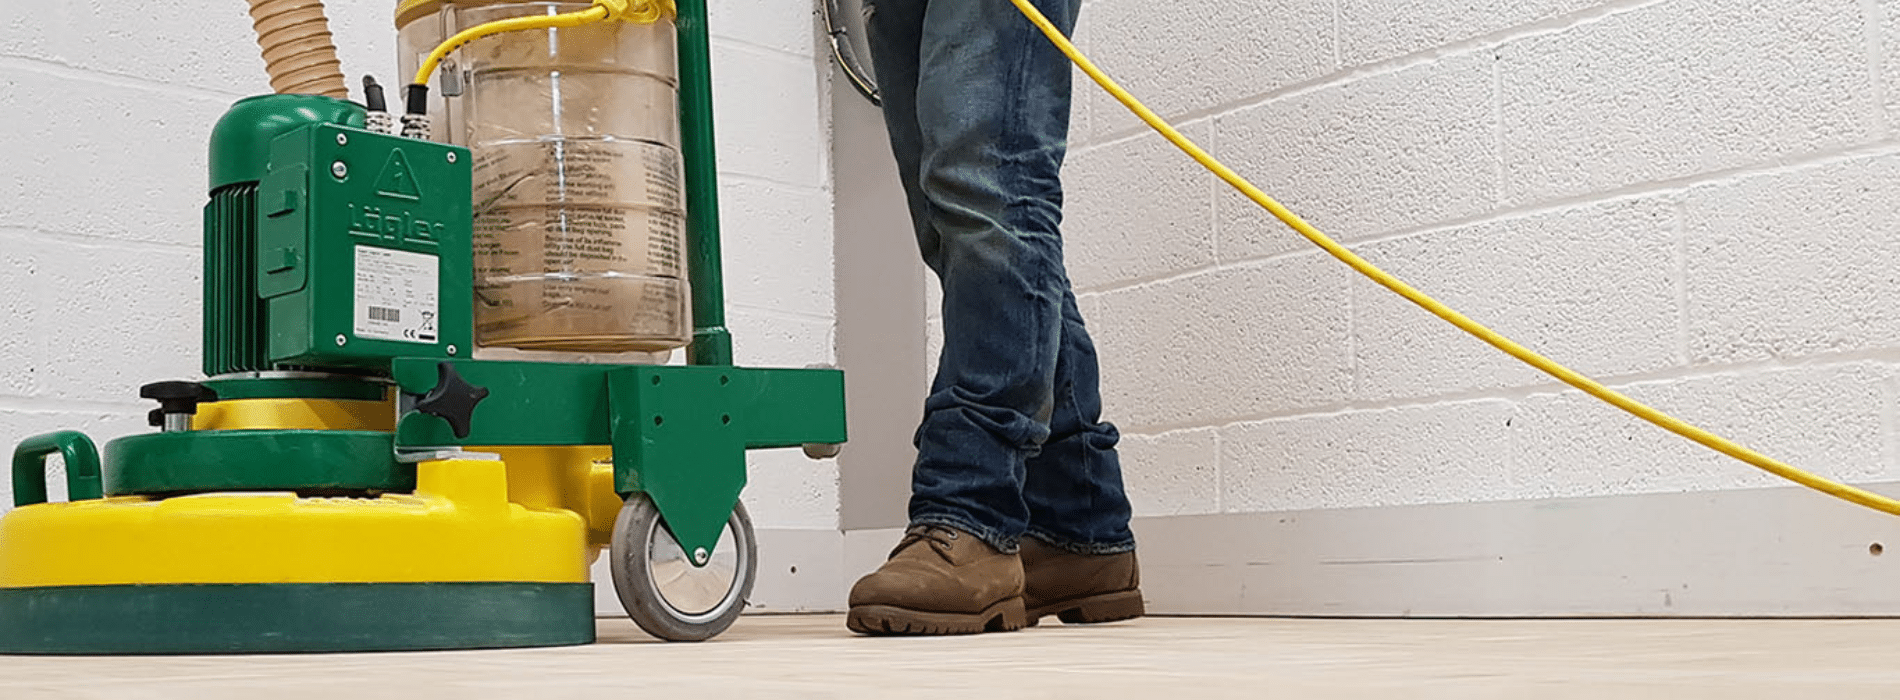 In Whitechapel, E1, Mr Sander® use the Bona FlexiSand 1.9, a powerful buffer sander (Ø 407 mm) with 1.9 kW effect, 230 V voltage, and 50 Hz/60 Hz frequency. It is connected to a dust extraction system equipped with a HEPA filter, ensuring a clean and efficient sanding process for parquet floors.